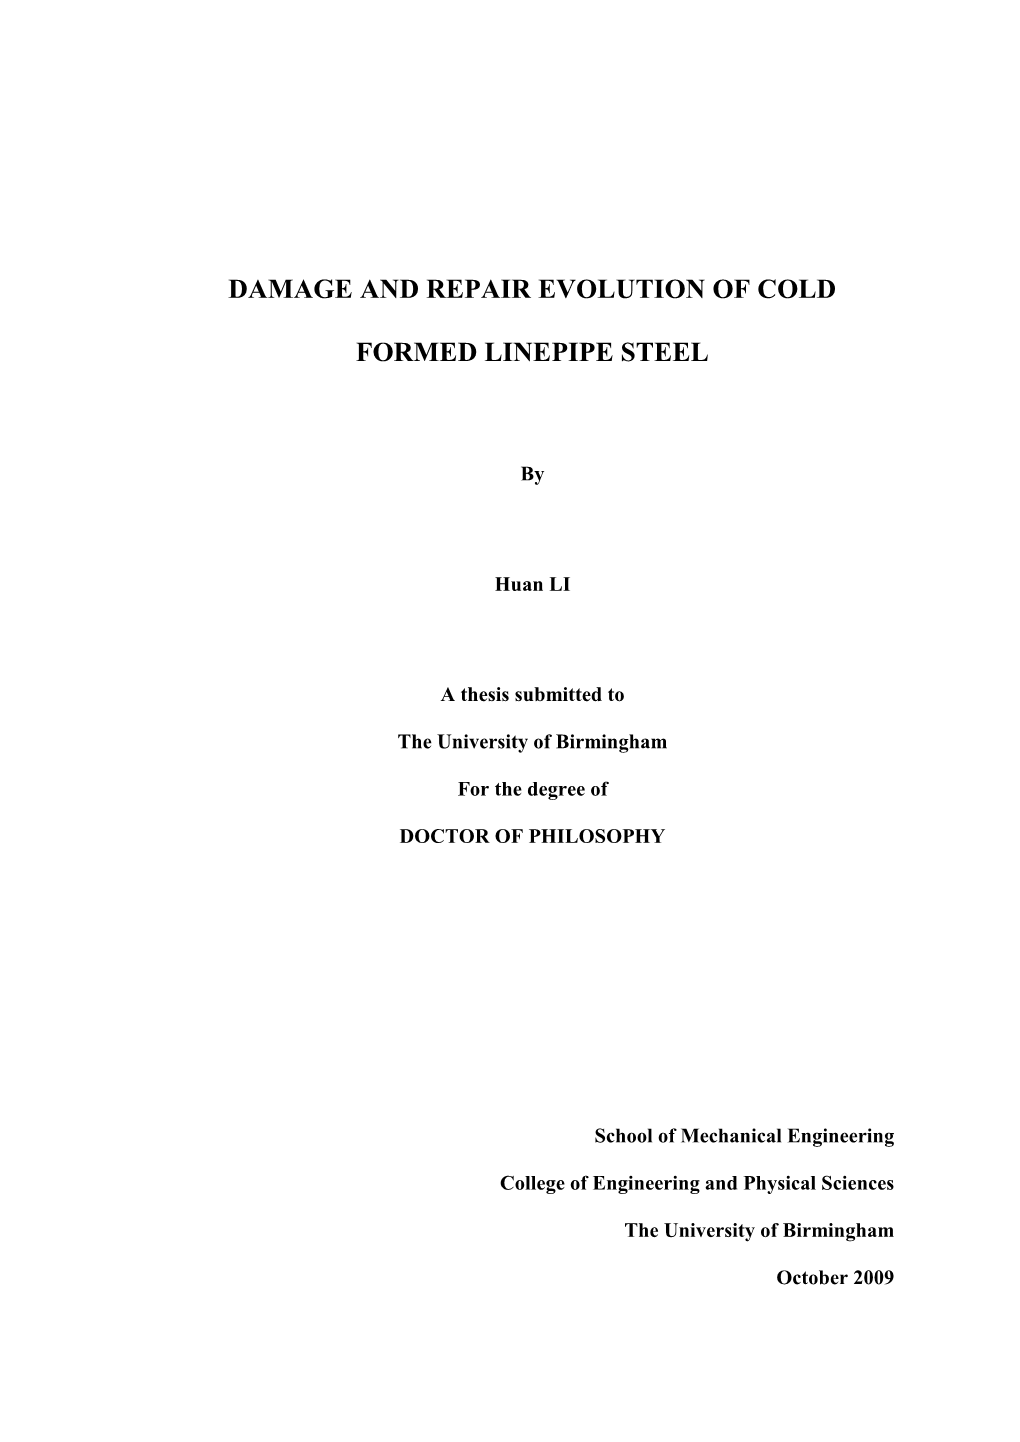 Damage and Repair Evolution of Cold Formed Linepipe Steel